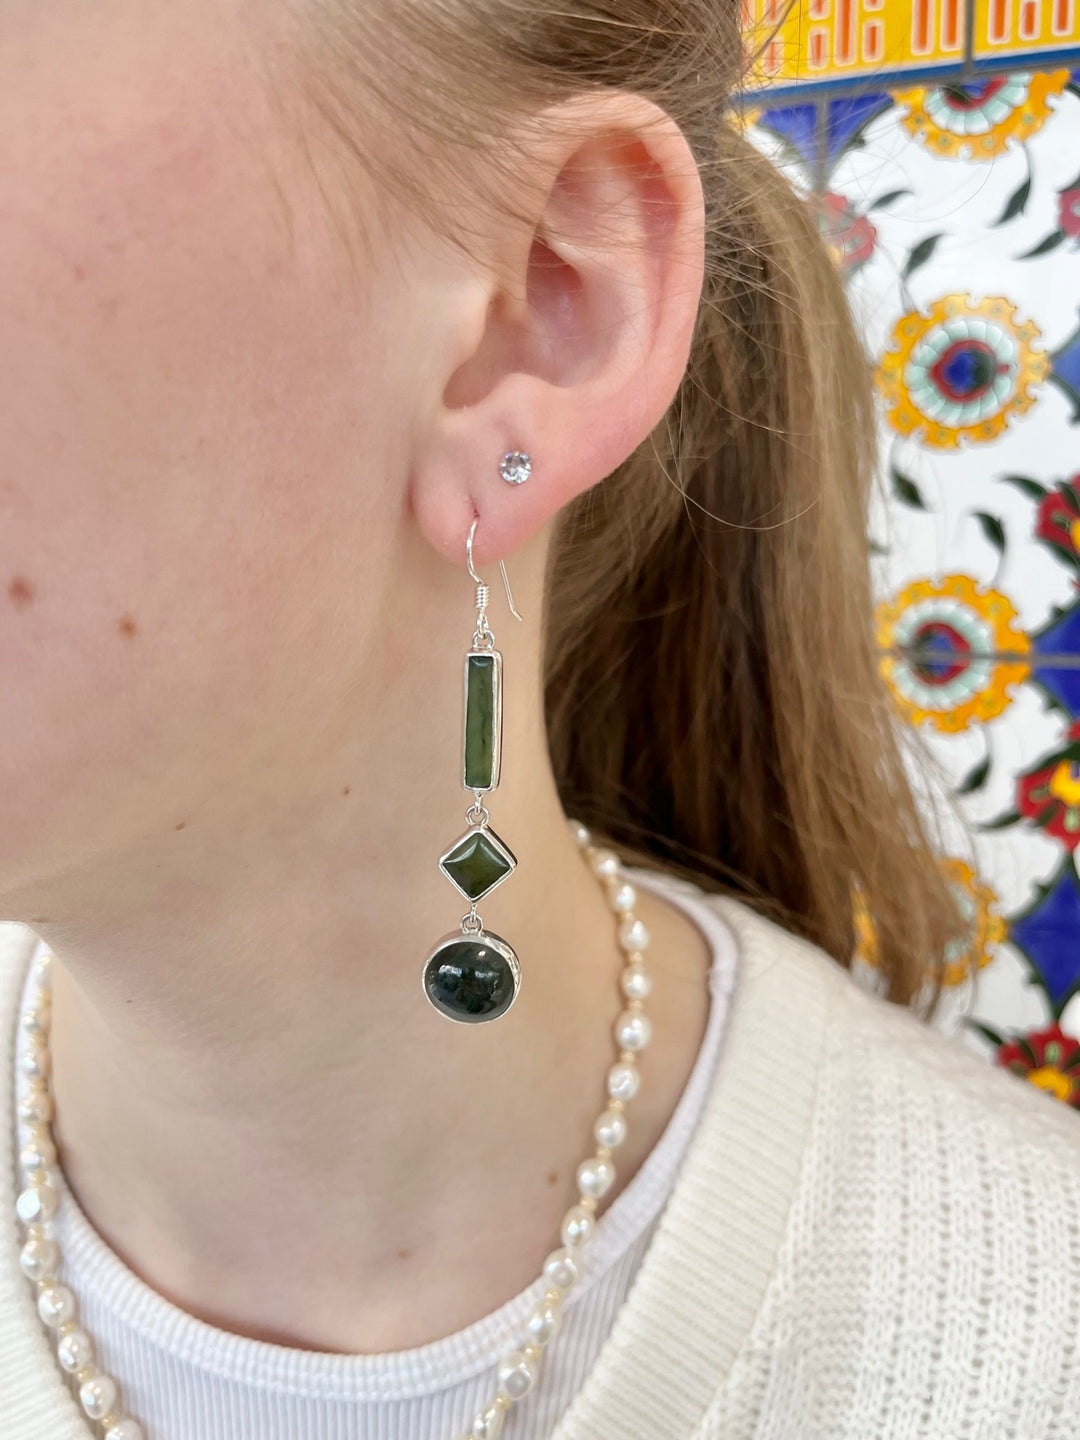 New Zealand greenstone and sterling silver earrings